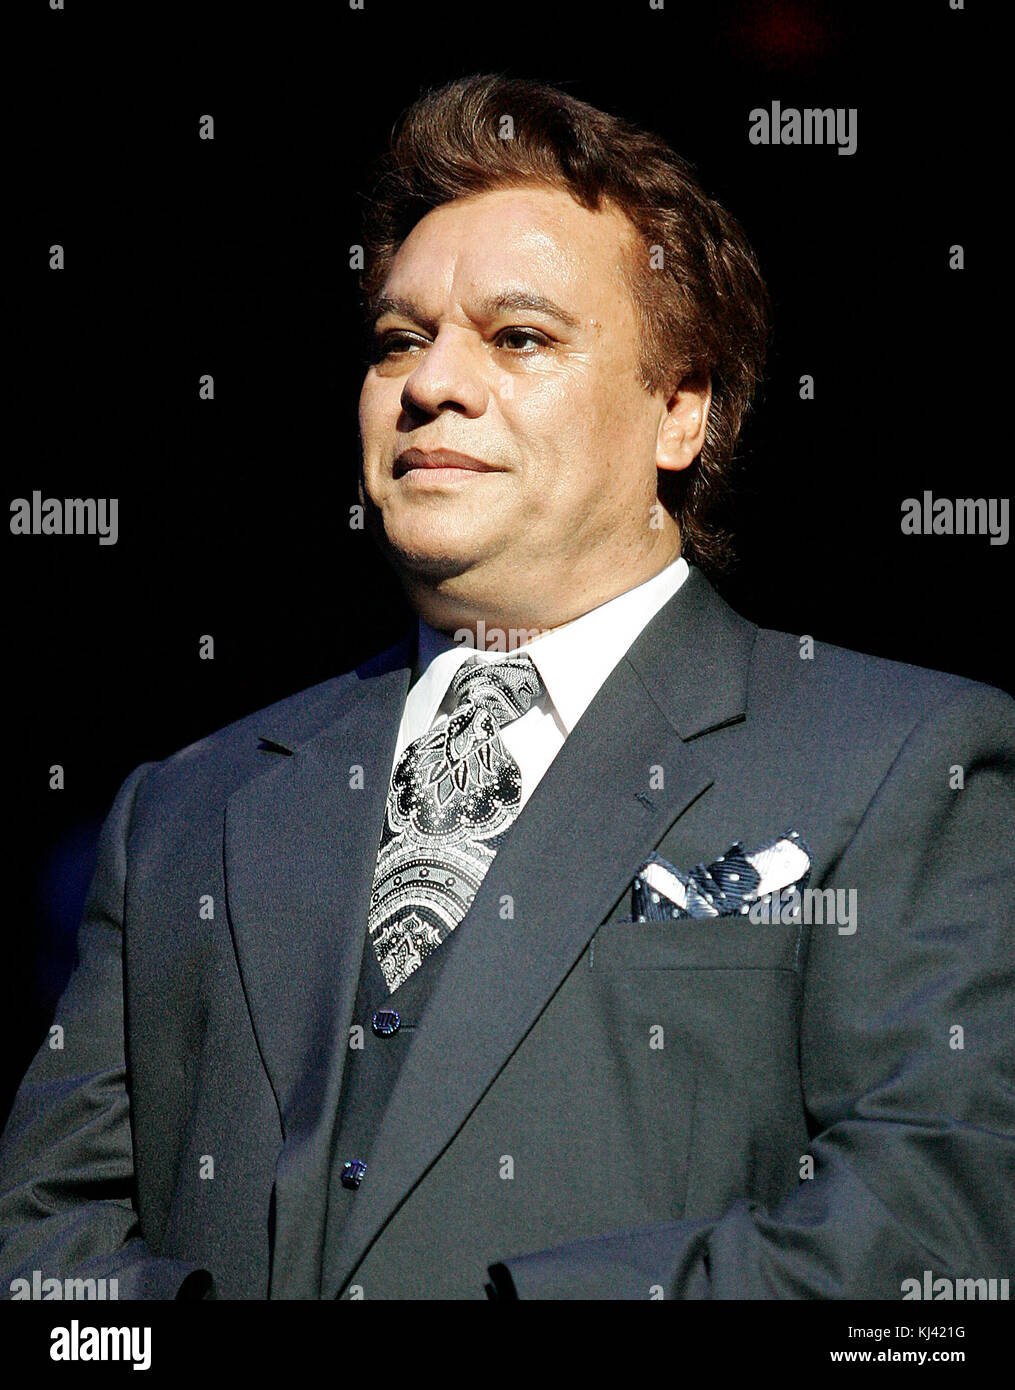 Miami Florida March 11 Juan Gabriel Performs In Concert At The American Airlines Arena On 1238